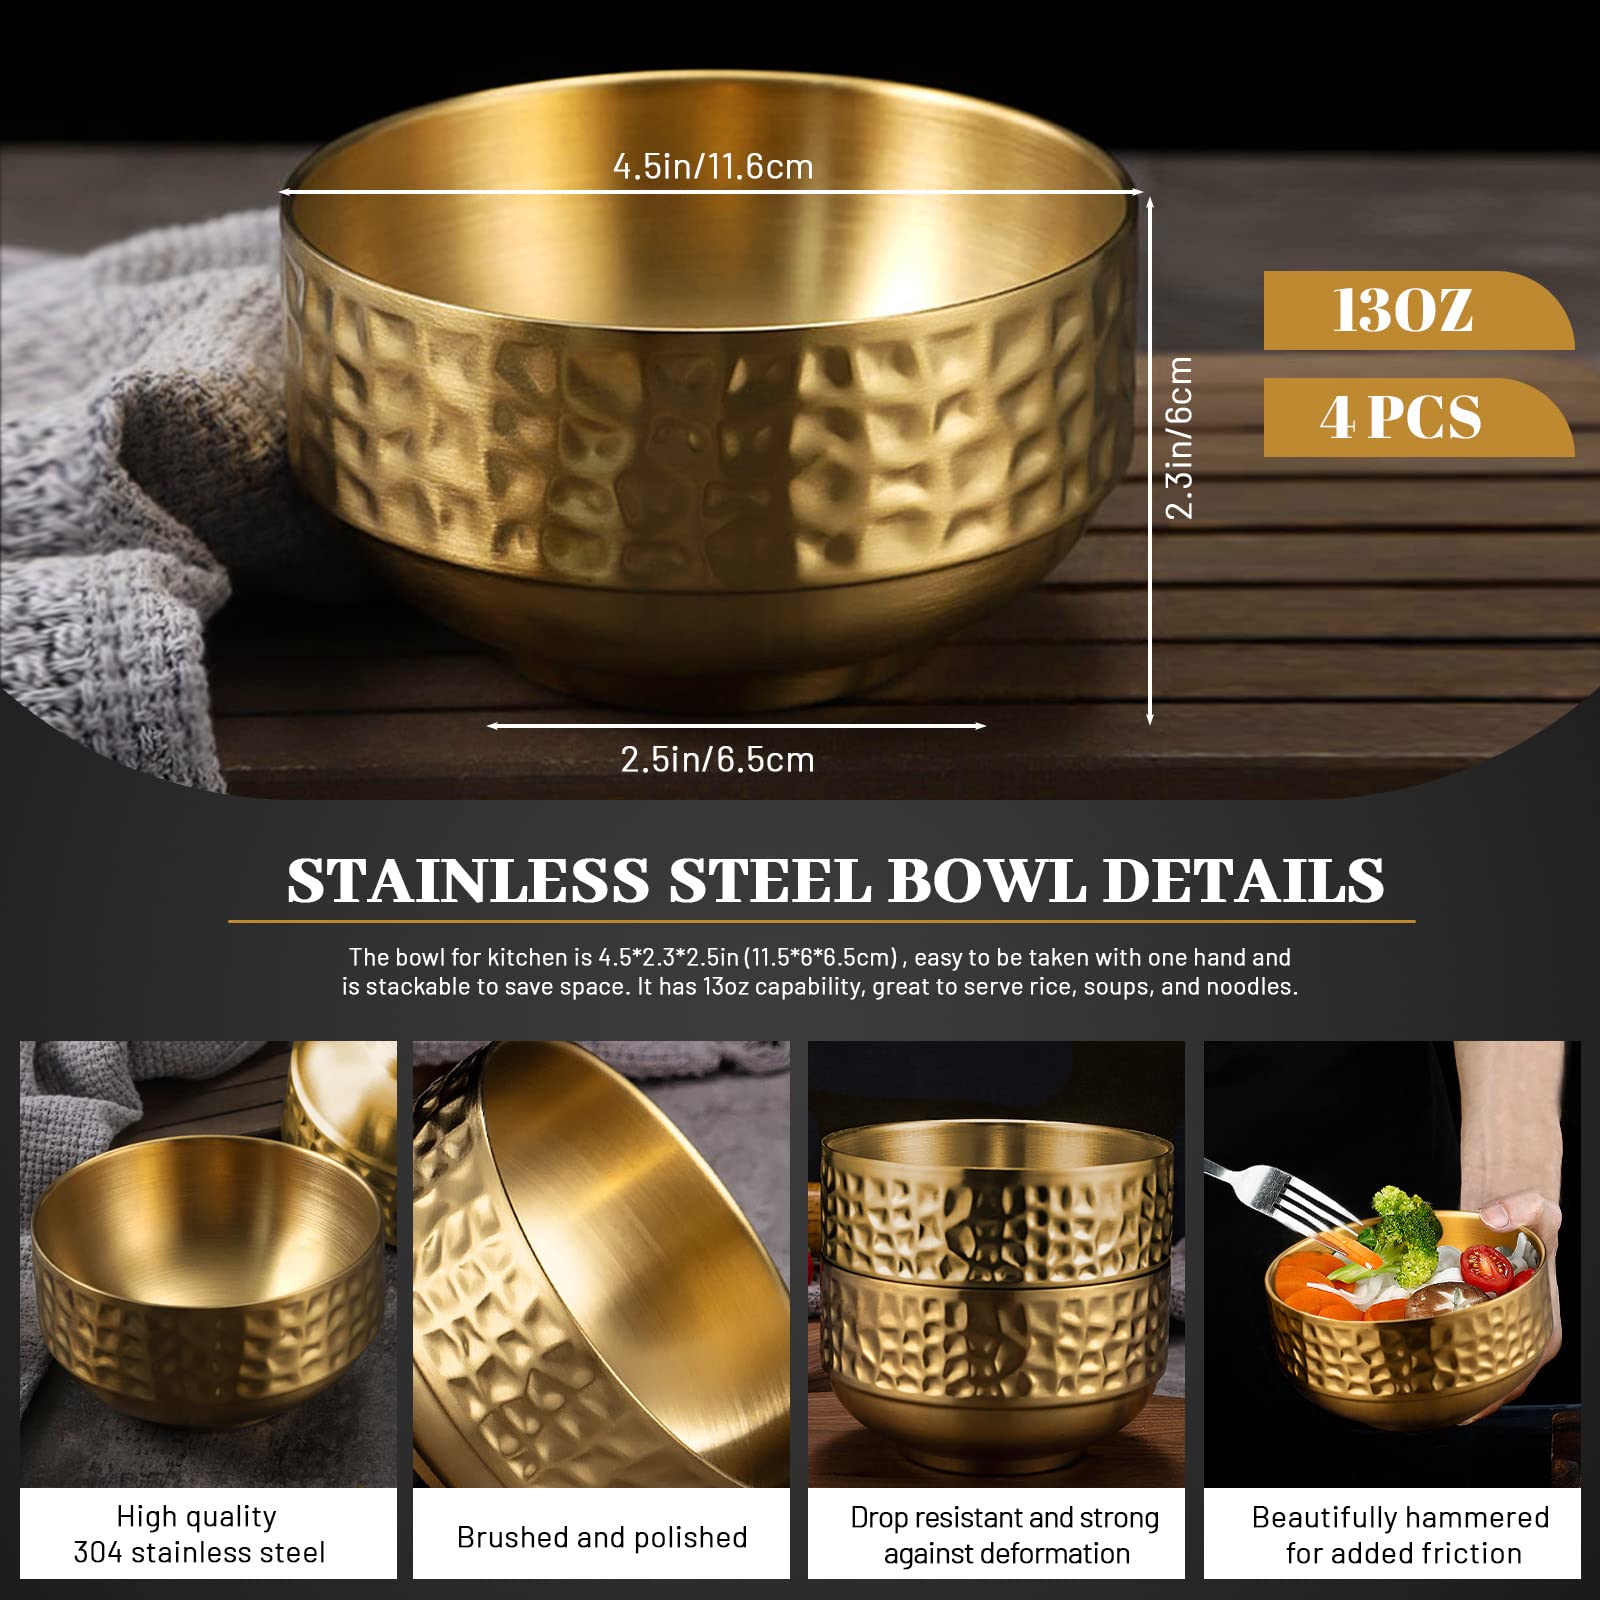 4 Pcs Gold Stainless Steel Bowls, 13Oz Double Walled Soup Bowls, Thick Non Slip Appetizer Snack Bowls, Small Metal Serving Bowls for Sauces, Rice, Noodles, Ice Cream, Oat (4 pcs)